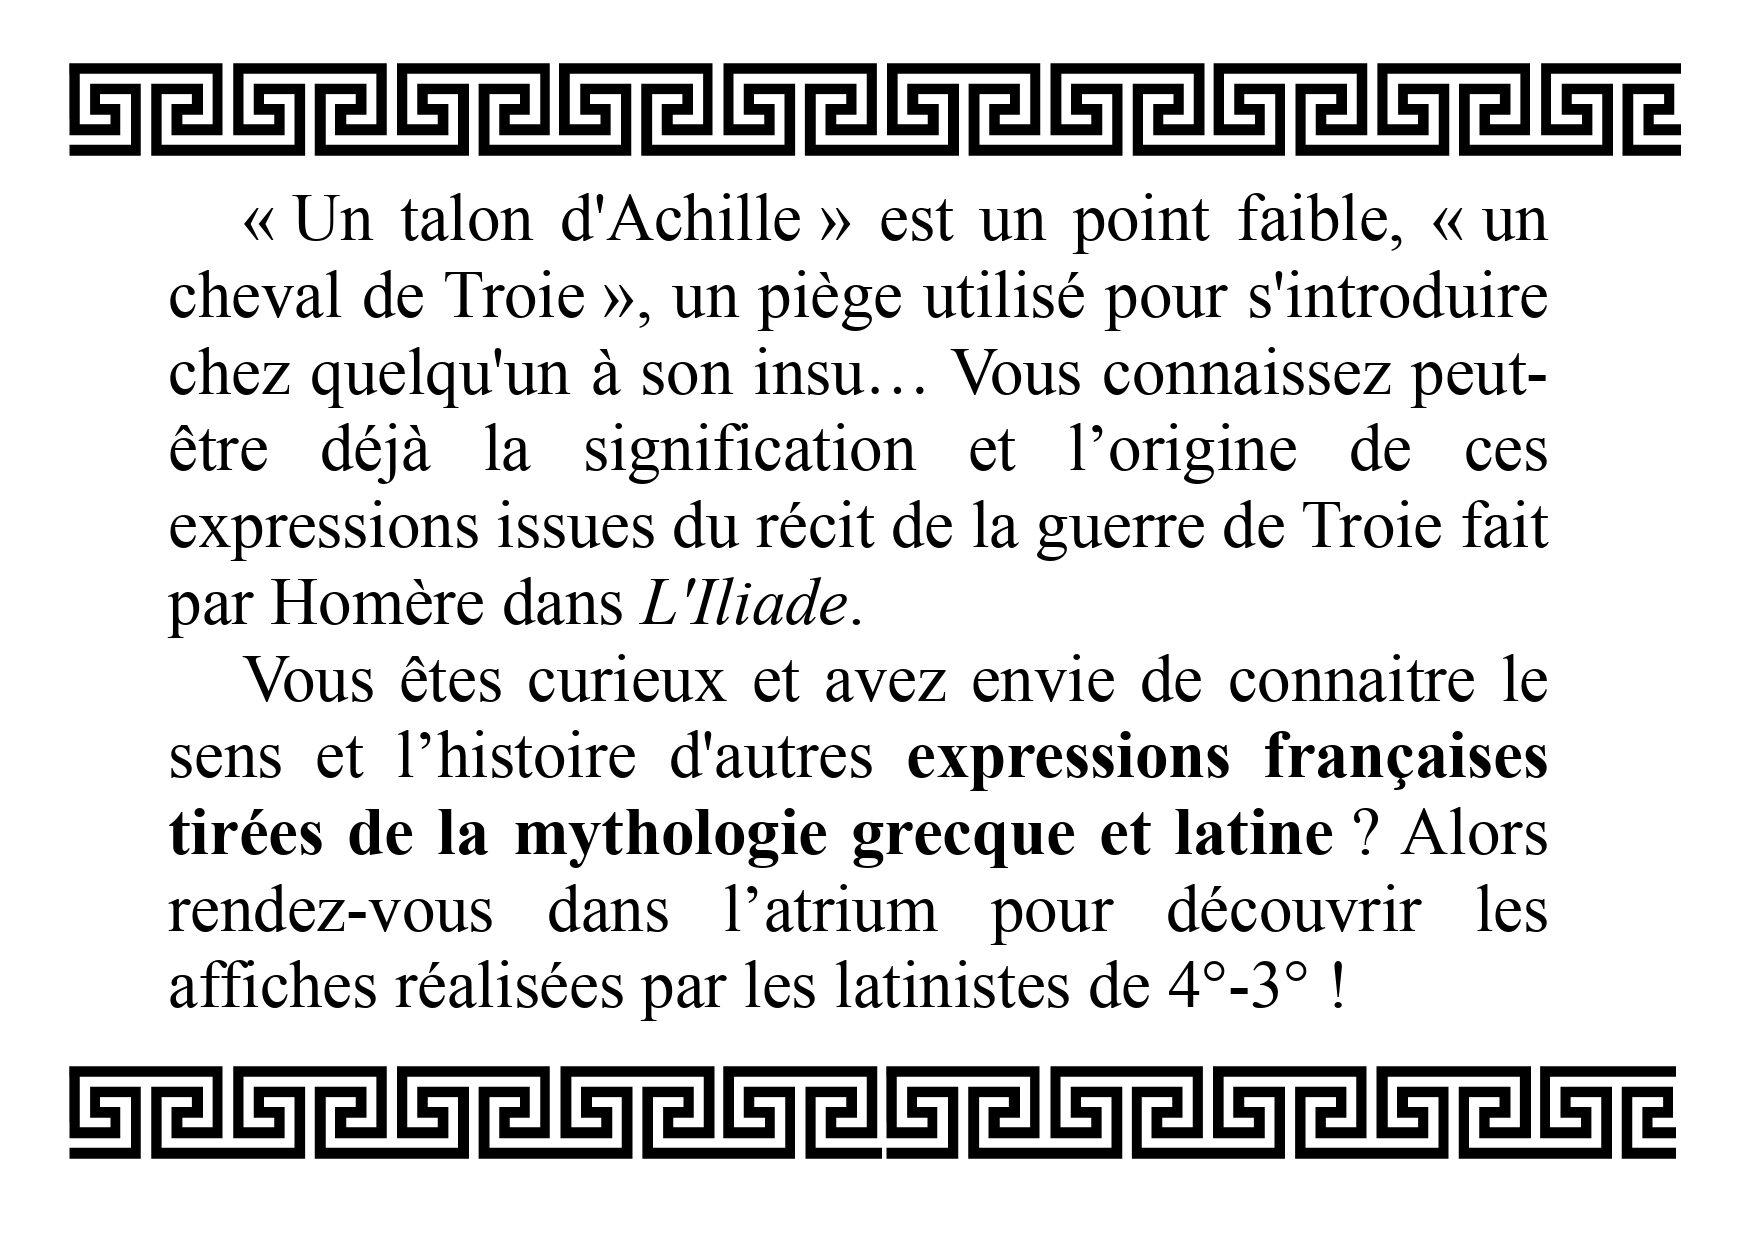 Exposition expressions issues de la mythologie_page-0001.jpg